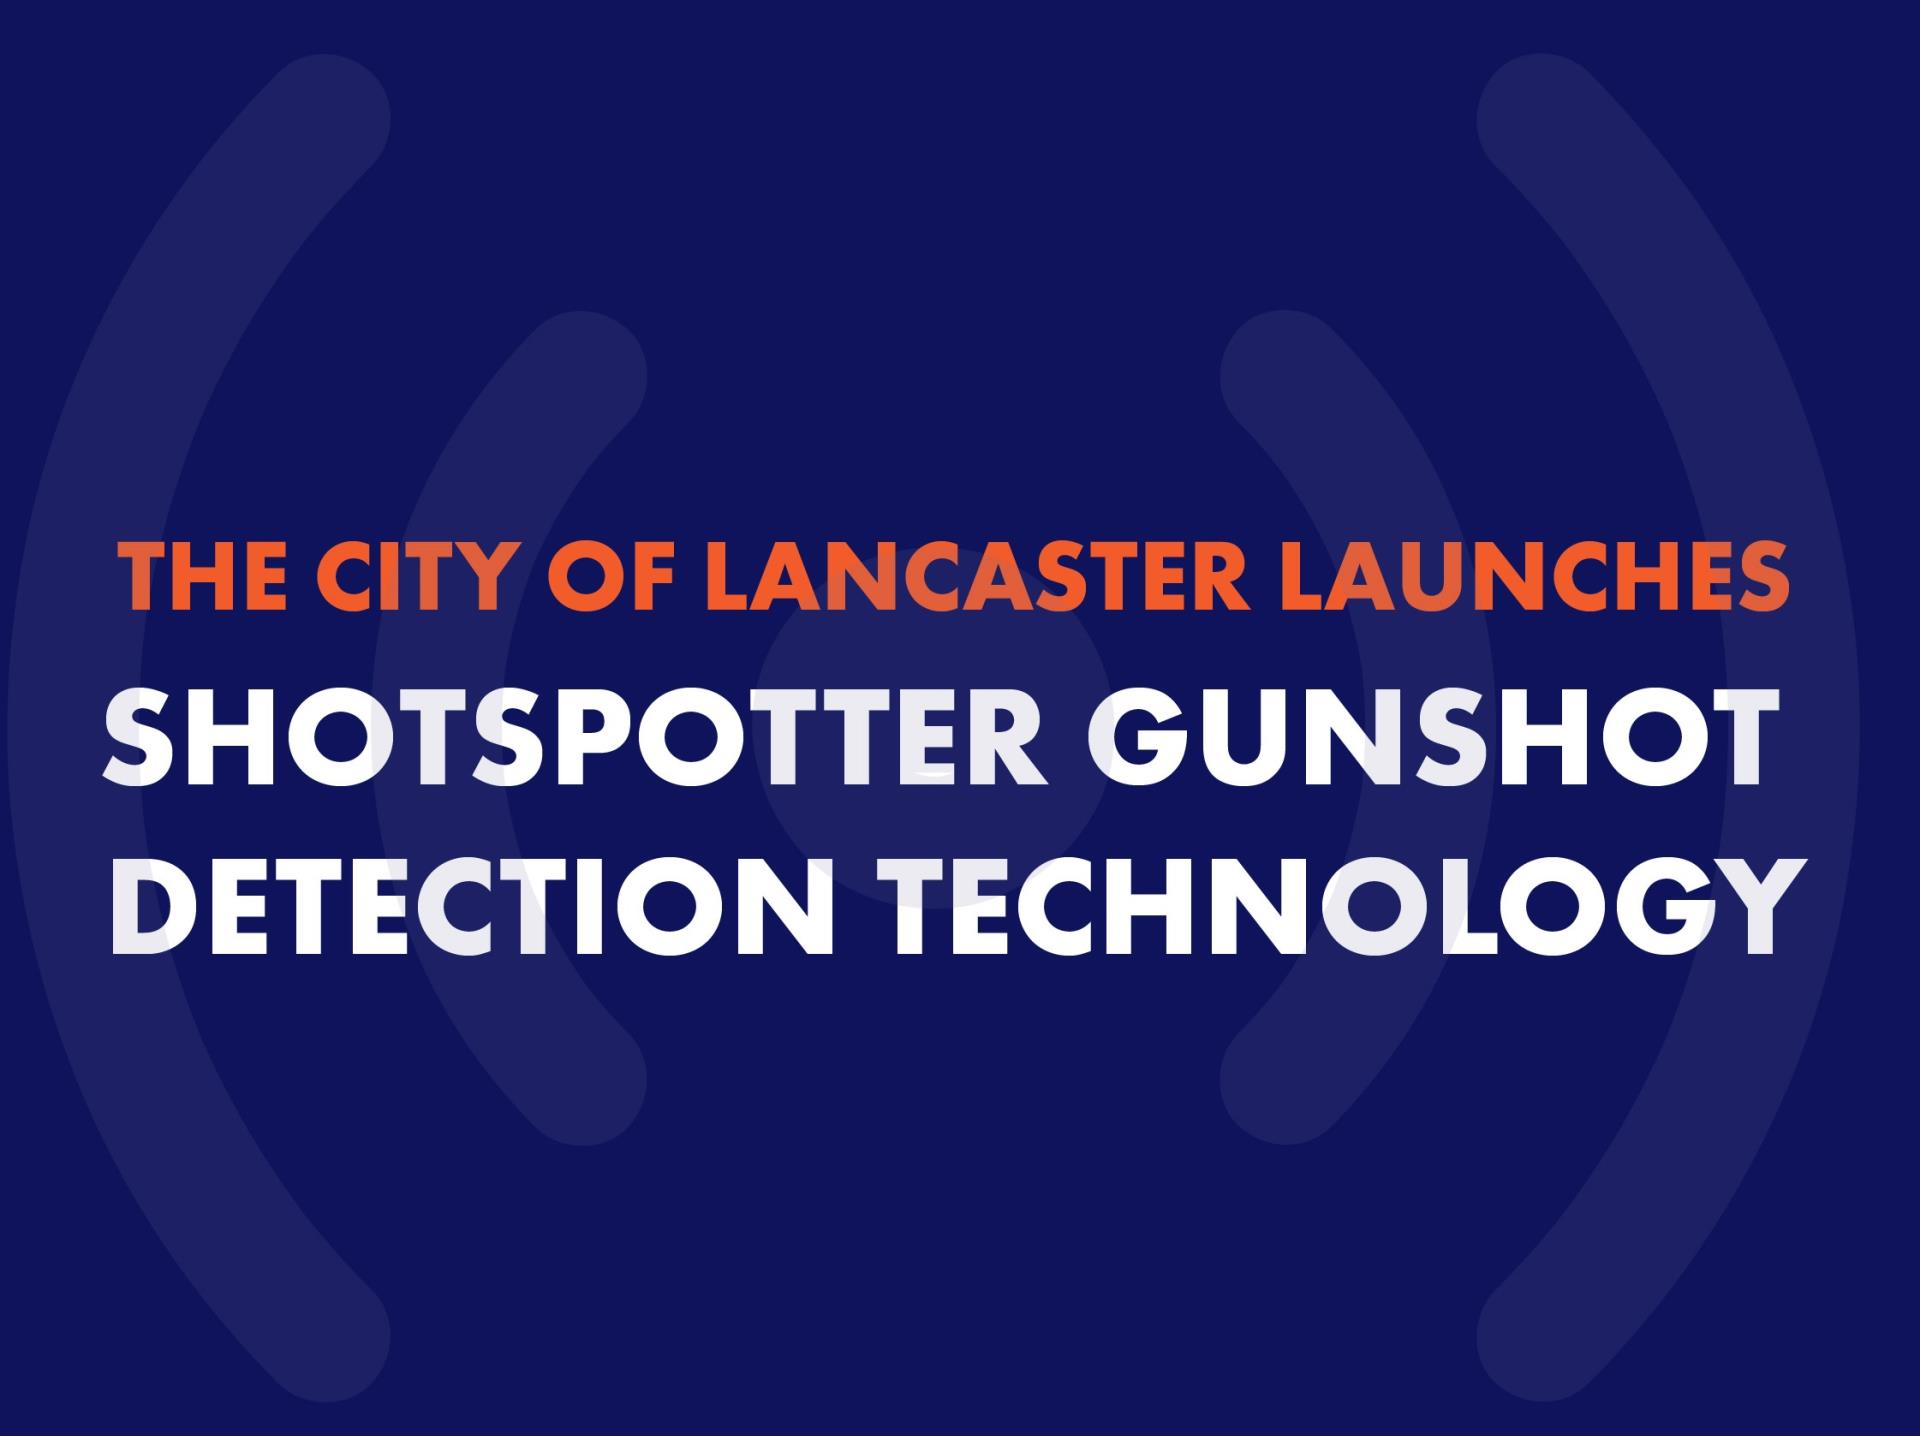 New Gunshot Detection Technology to Enhance Public Safety in the City of Lancaster